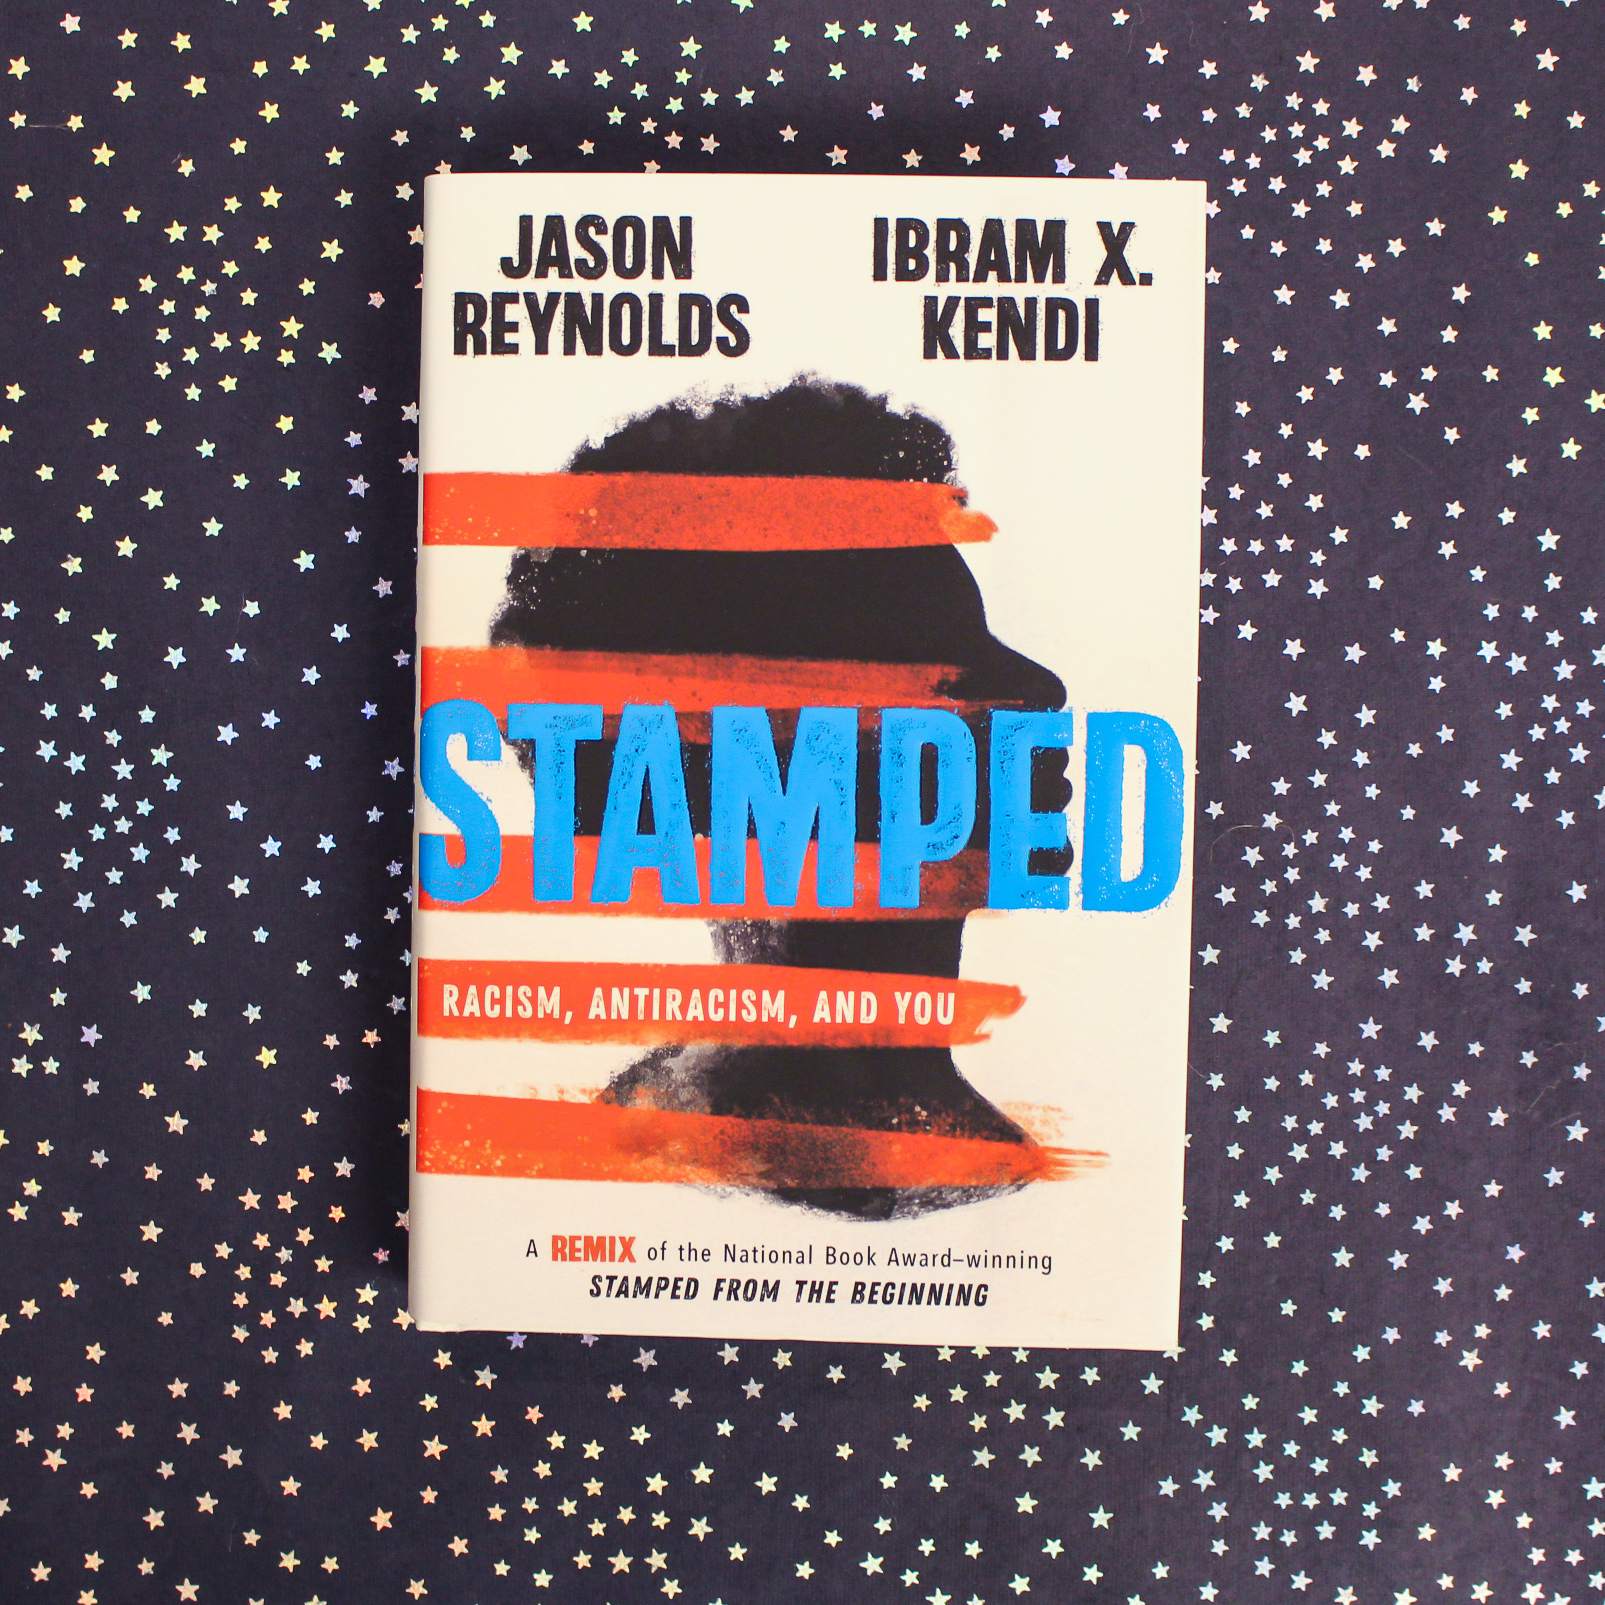 Instagram image of the book "Stamped" by Jason Reynolds and Ibram X. Kendi